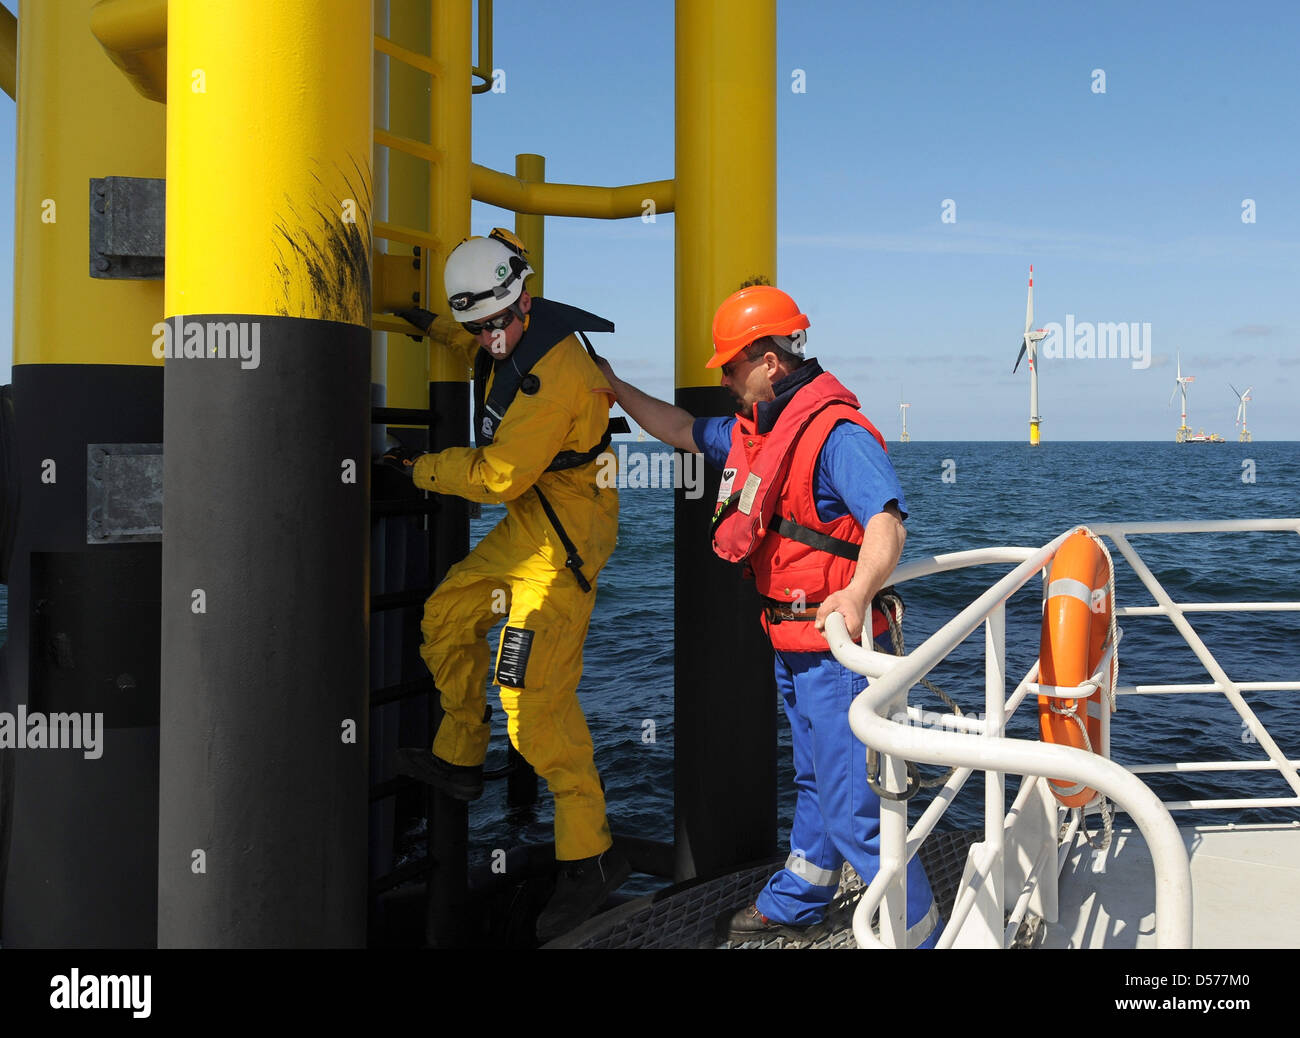 EWE network technician Rainer Juetting (L) and his colleague of 'Frisia' Sascha Reinert (R) seen onboard the maintenance ship 'Wind Lift 1' during a deployment at the offshore windpark 'Alpha Ventus' 45km off the coast of Borkum island, Germany, 23 April 2010. The park is the first of its kind in Germany and will officially be inaugurated on 27 April 2010. The joint venture between Stock Photo